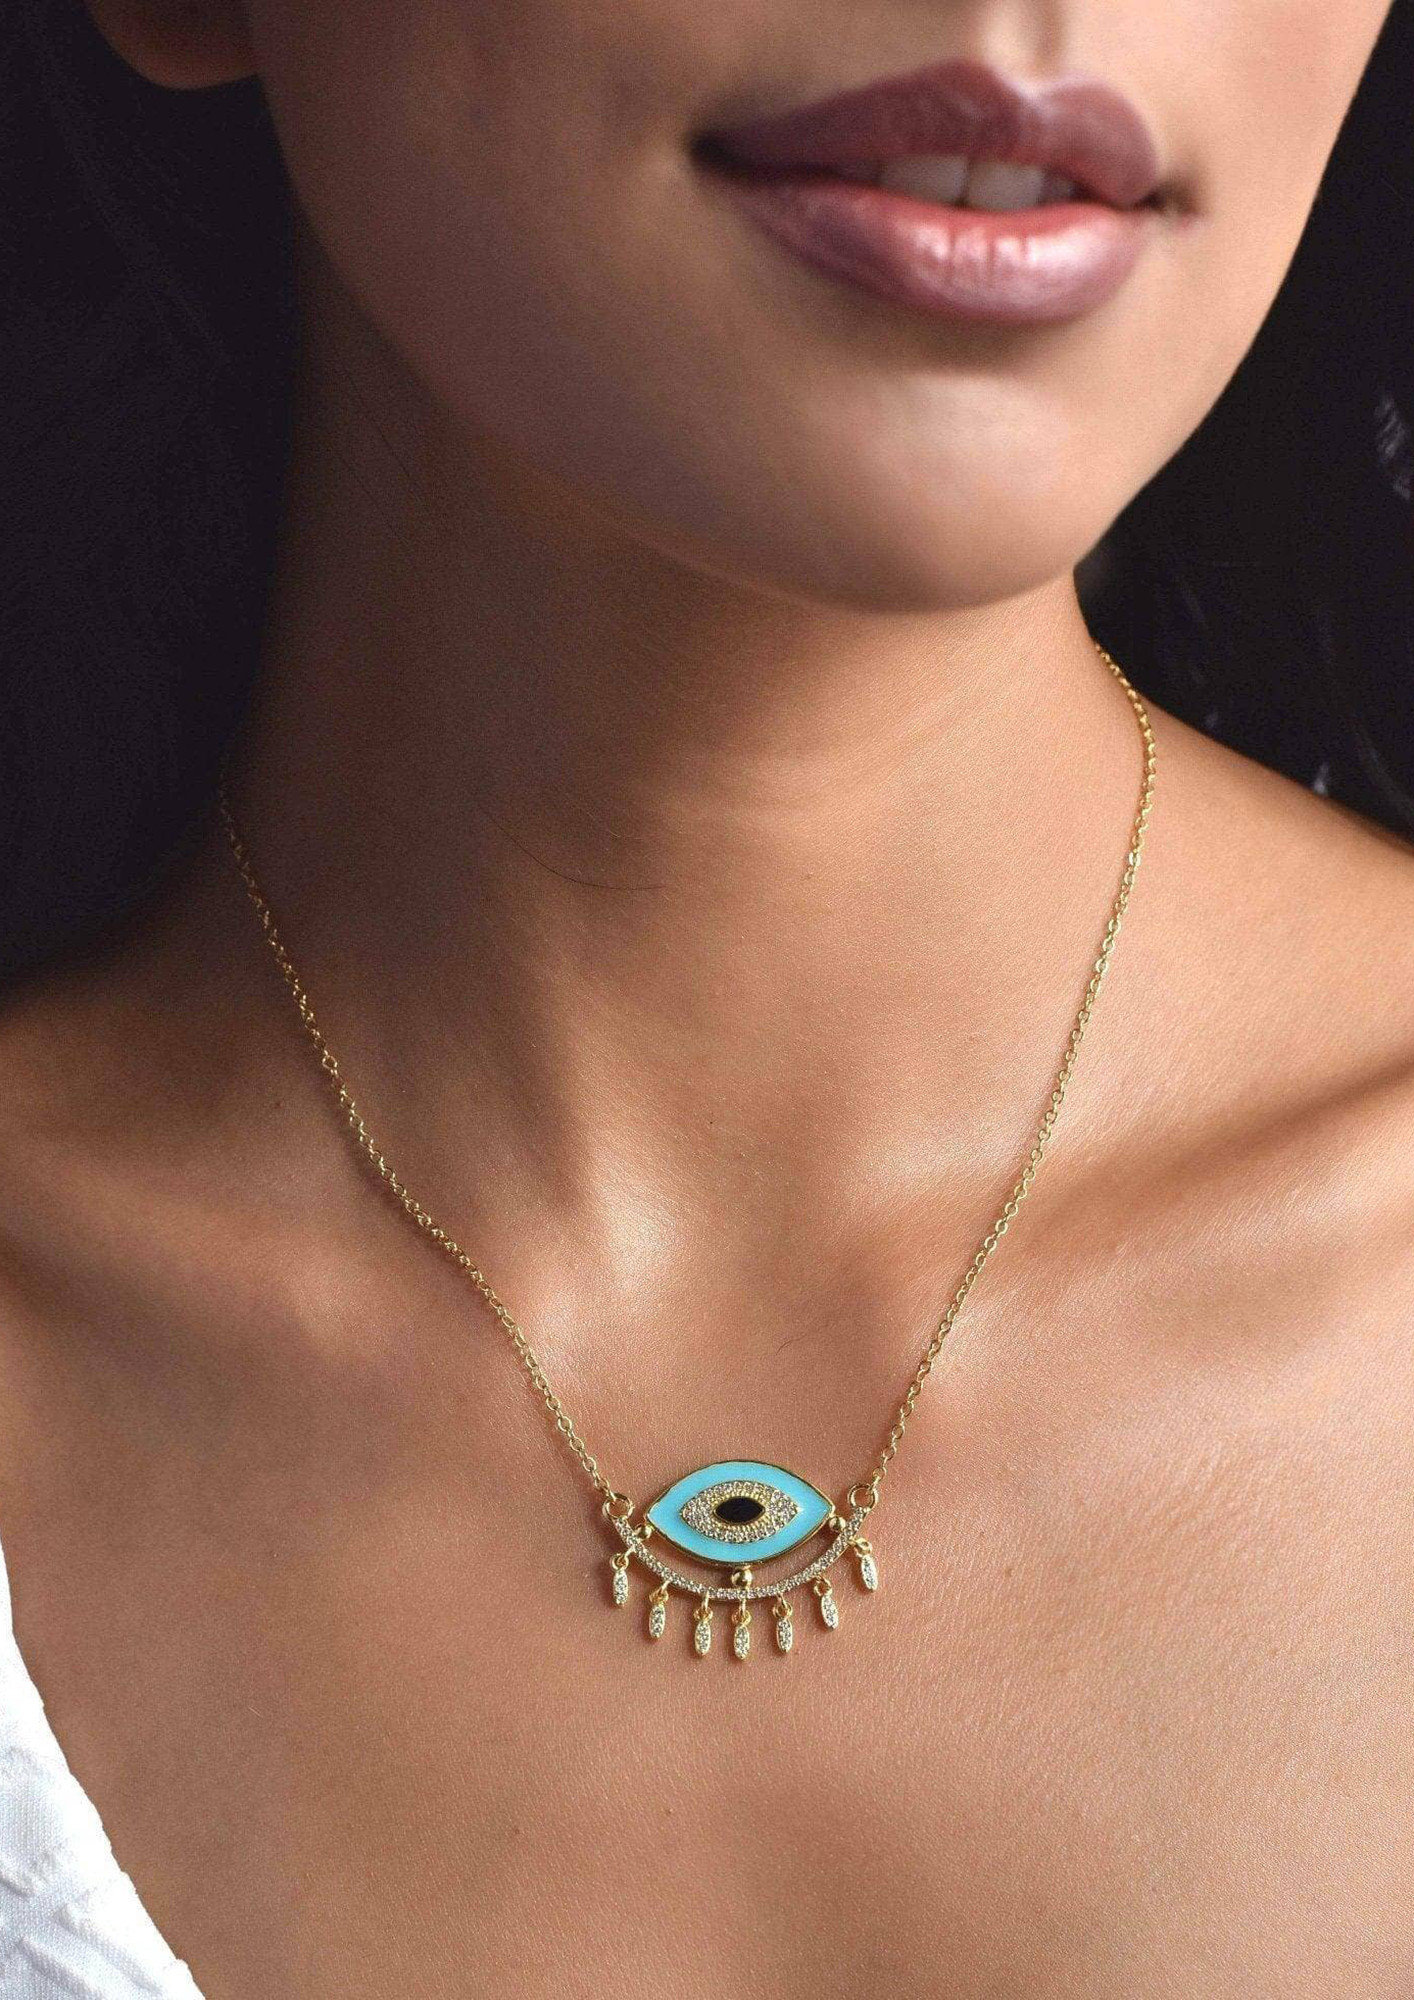 Isabella M Rainbow Stone Evil Eye Necklace Gold Plated Over Brass | eBay